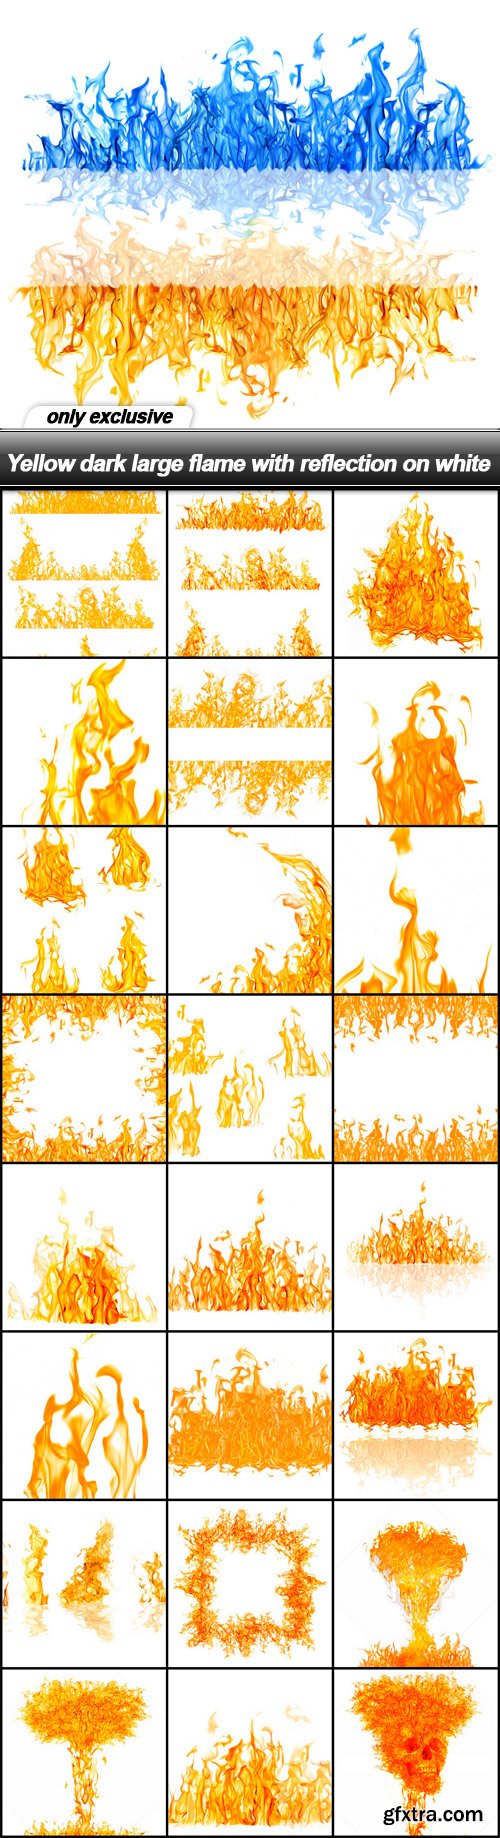 Yellow dark large flame with reflection on white - 25 UHQ JPEG